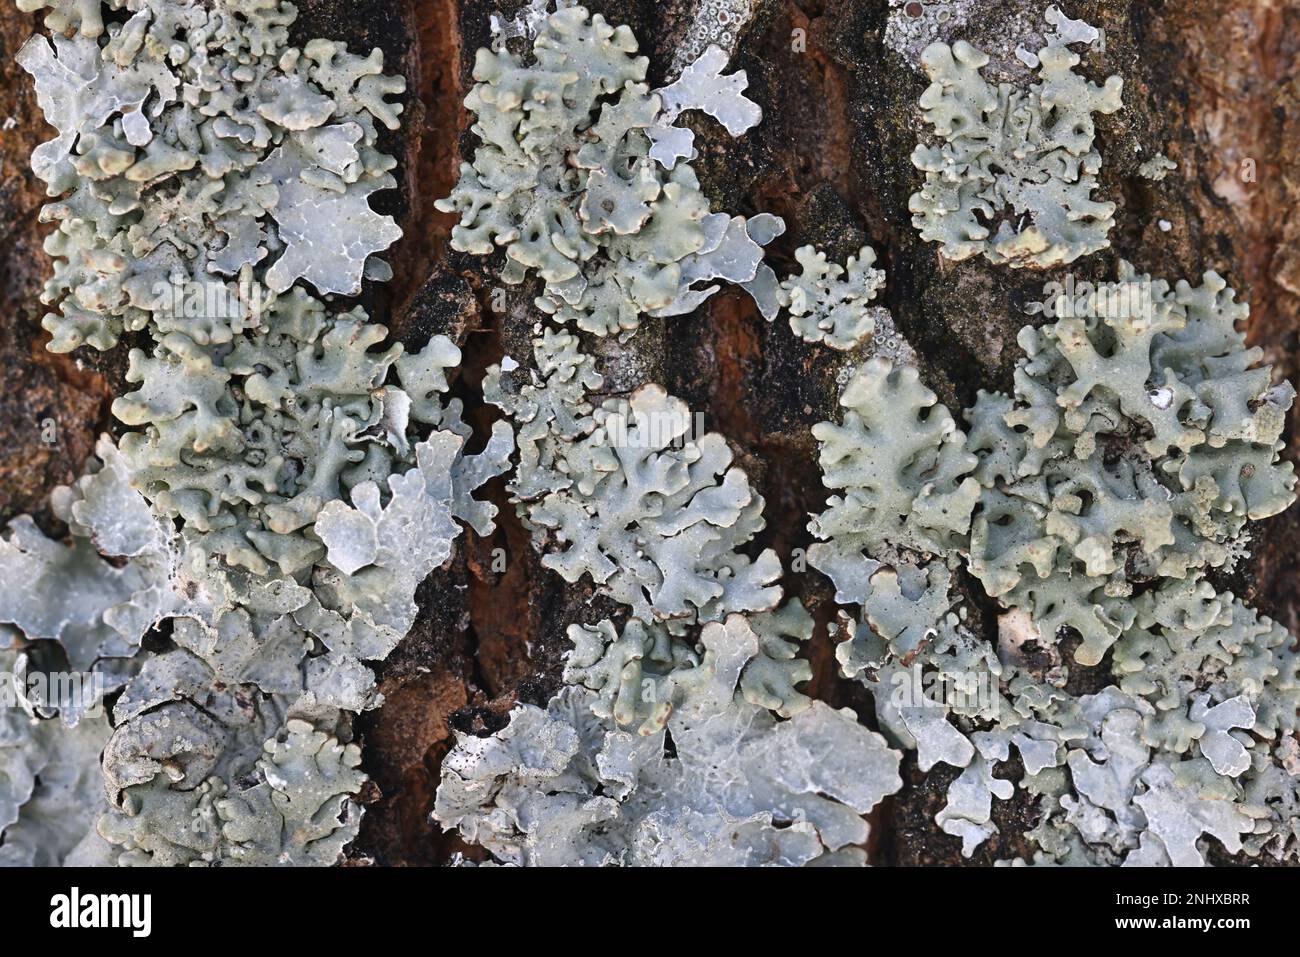 Hypogymnia tubulosa, commonly known as Powder-headed Tube Lichen, epiphytic lichen from Finland Stock Photo